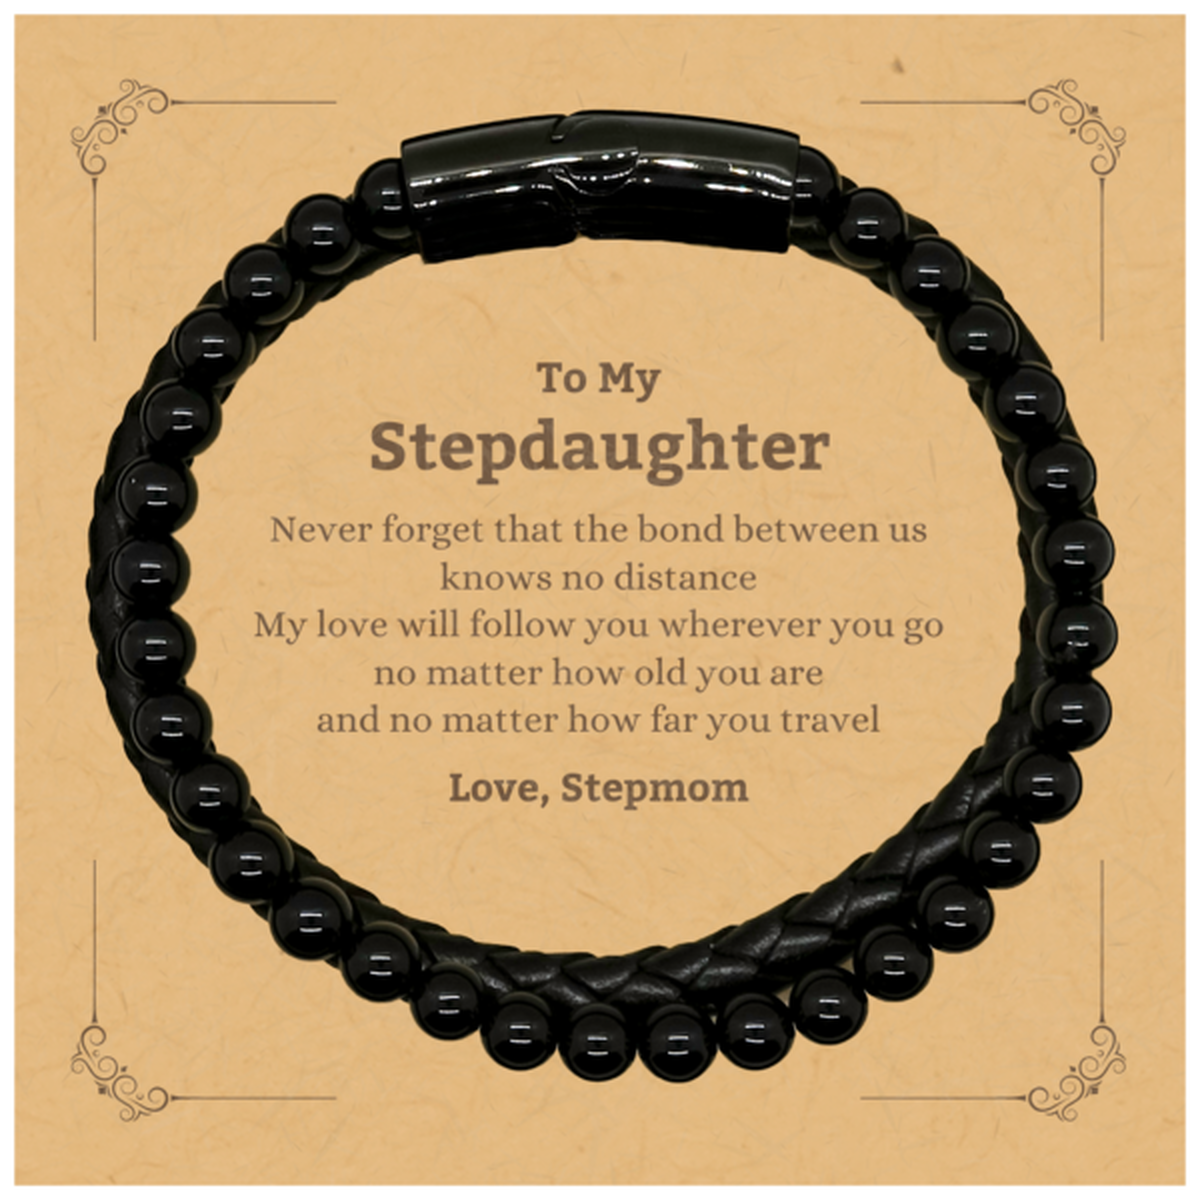 Stepdaughter Birthday Gifts from Stepmom, Adjustable Stone Leather Bracelets for Stepdaughter Christmas Graduation Unique Gifts Stepdaughter Never forget that the bond between us knows no distance. Love, Stepmom